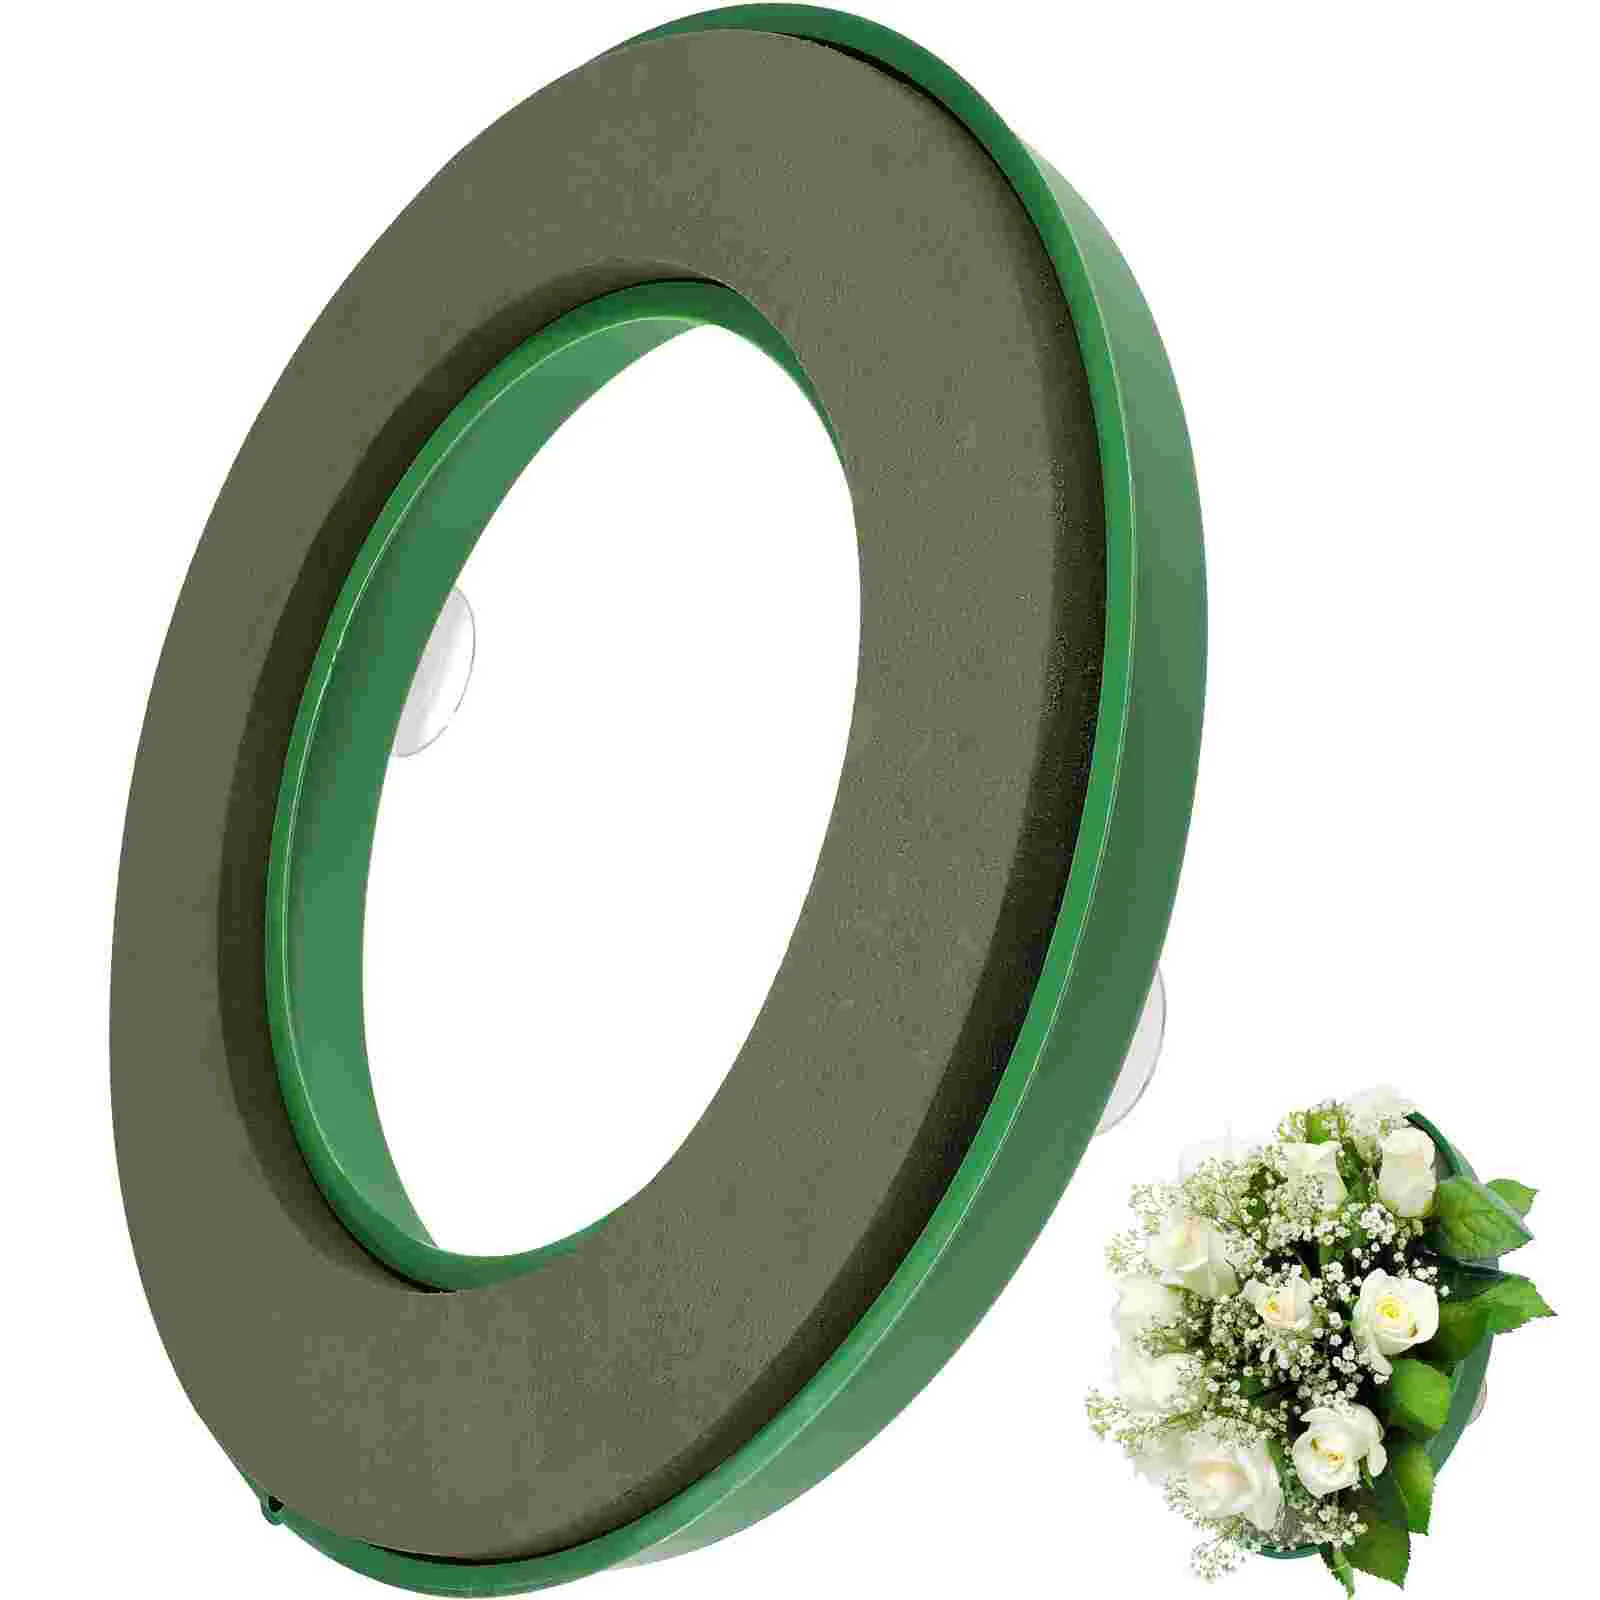 Foam Circles Wreath Base Form Garland Plastic Ring Floral Projects Mud Block Rings